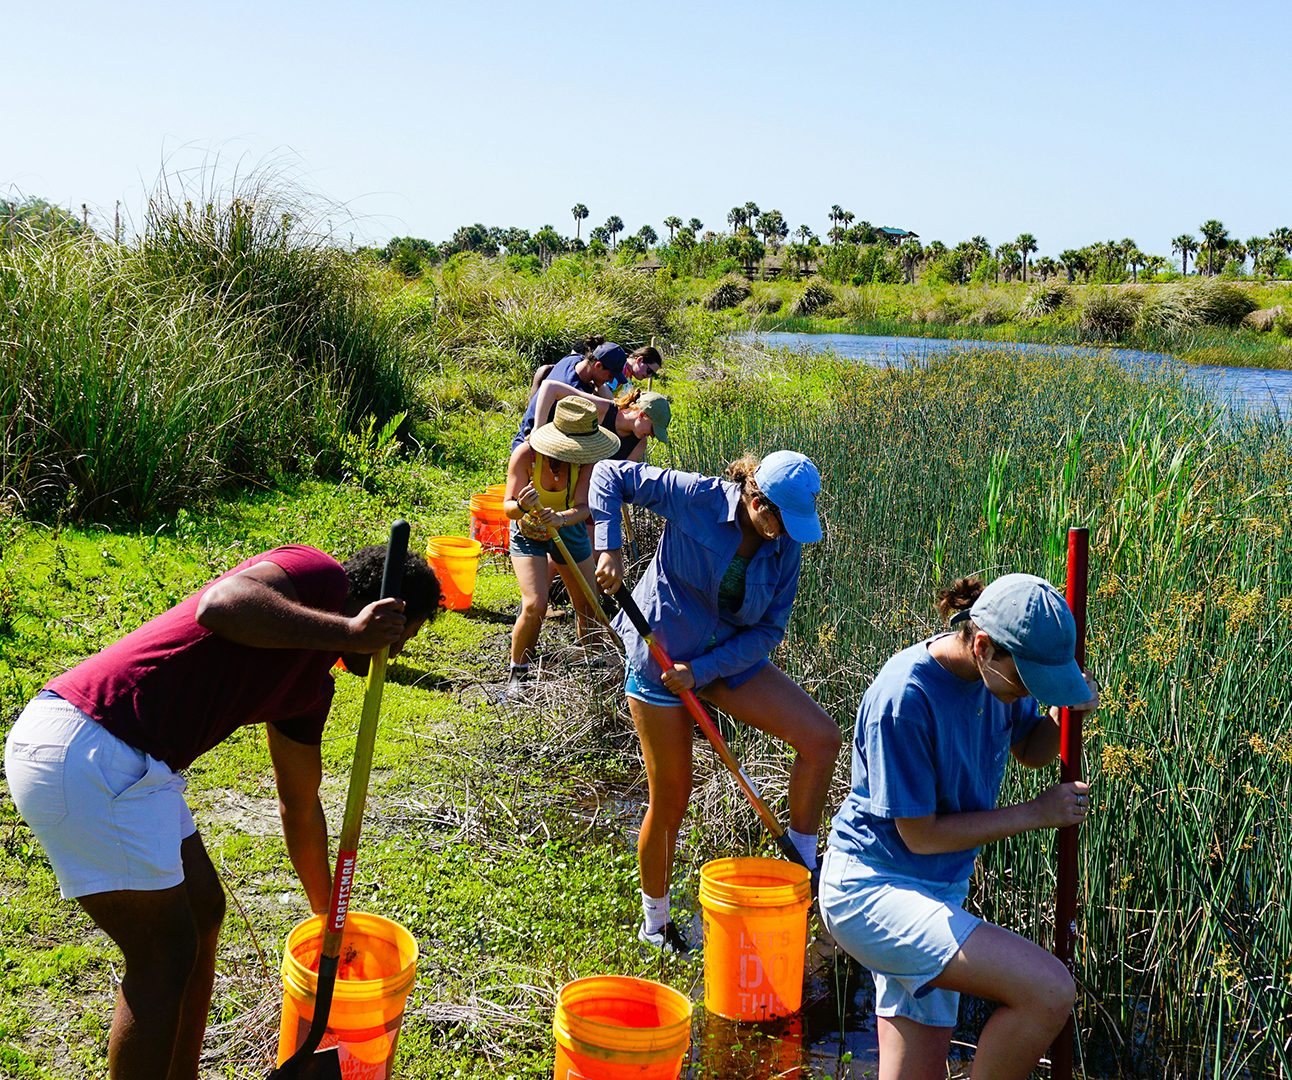 A group of people with orange buckets are lined up along the edge of a river bank, digging with shovels